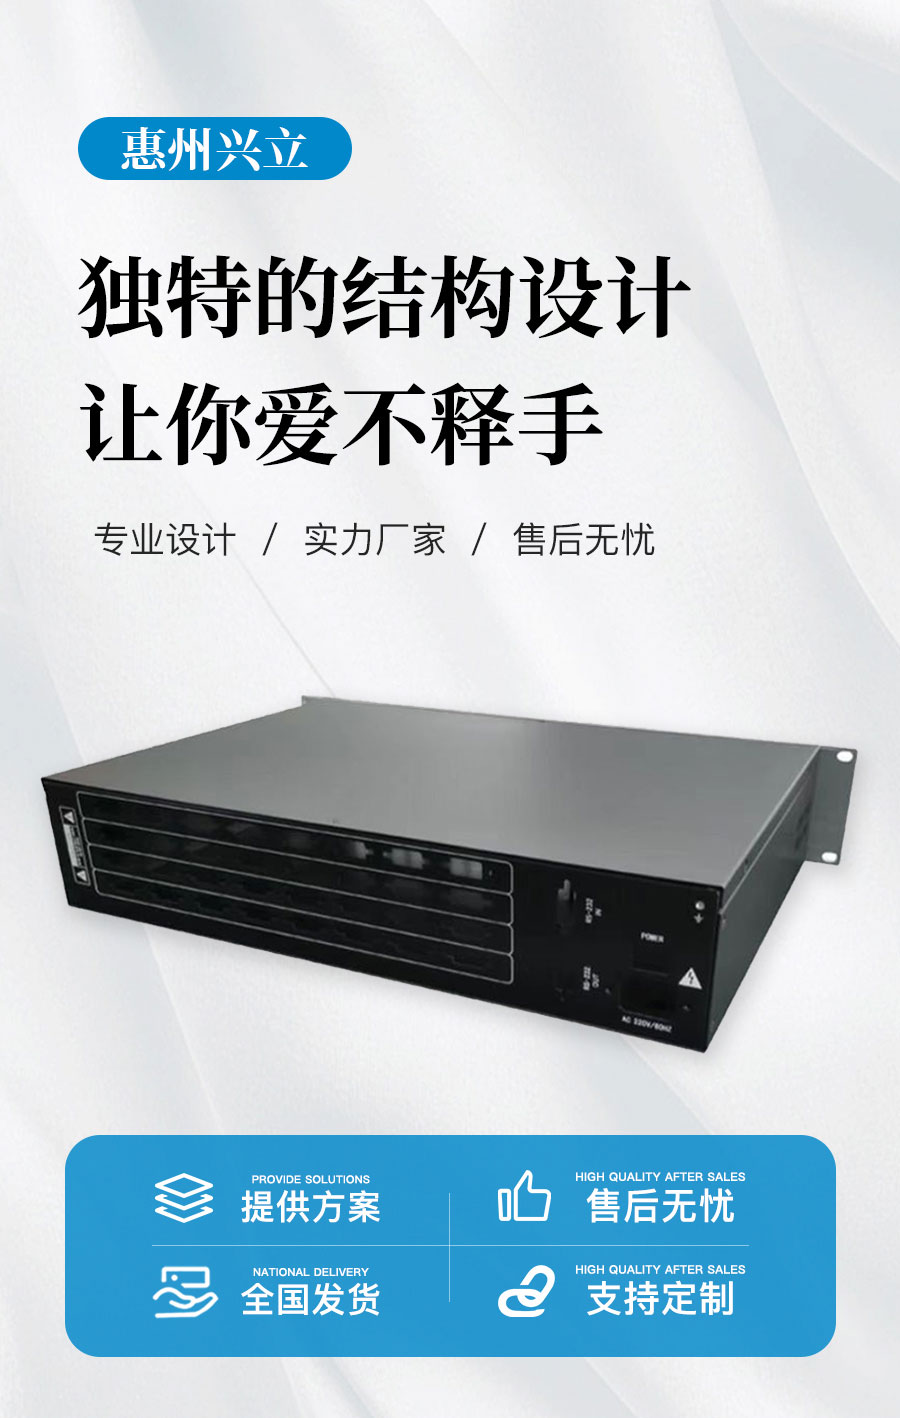 Xingli rack mounted server chassis with strong anti-interference ability Electronic equipment casing Network cabinet